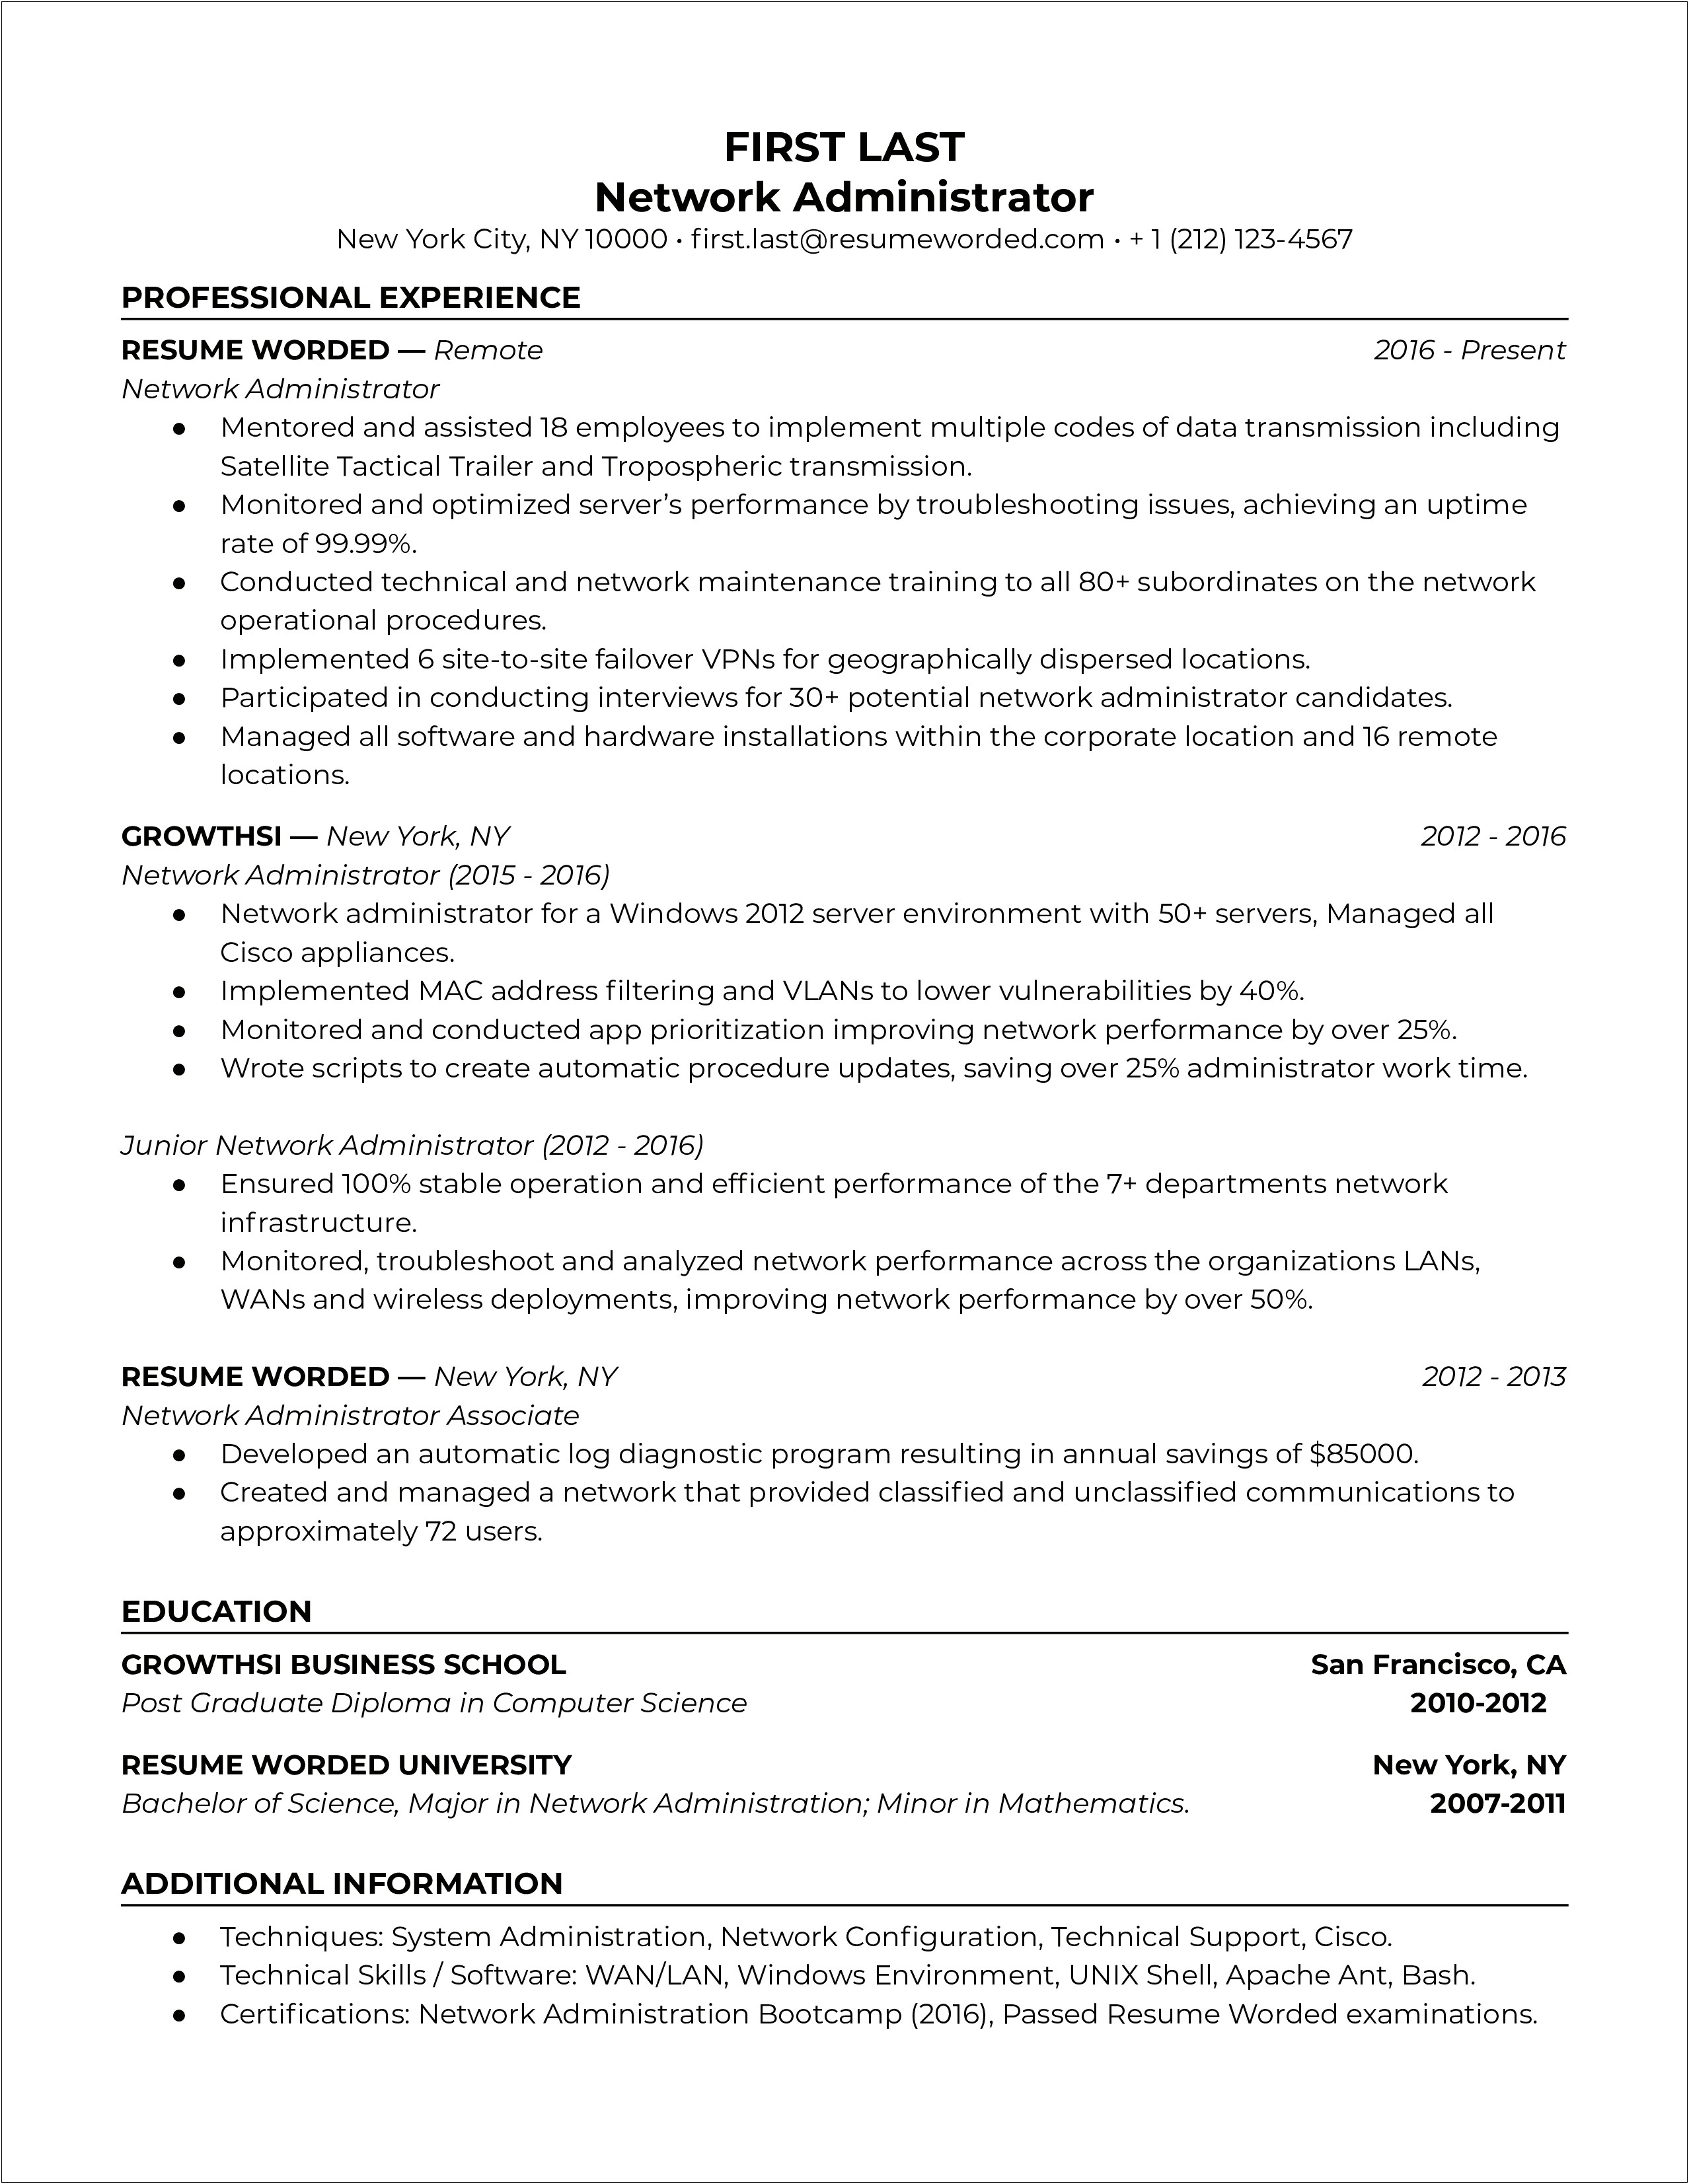 System Administrator Resume 4 Years Experience